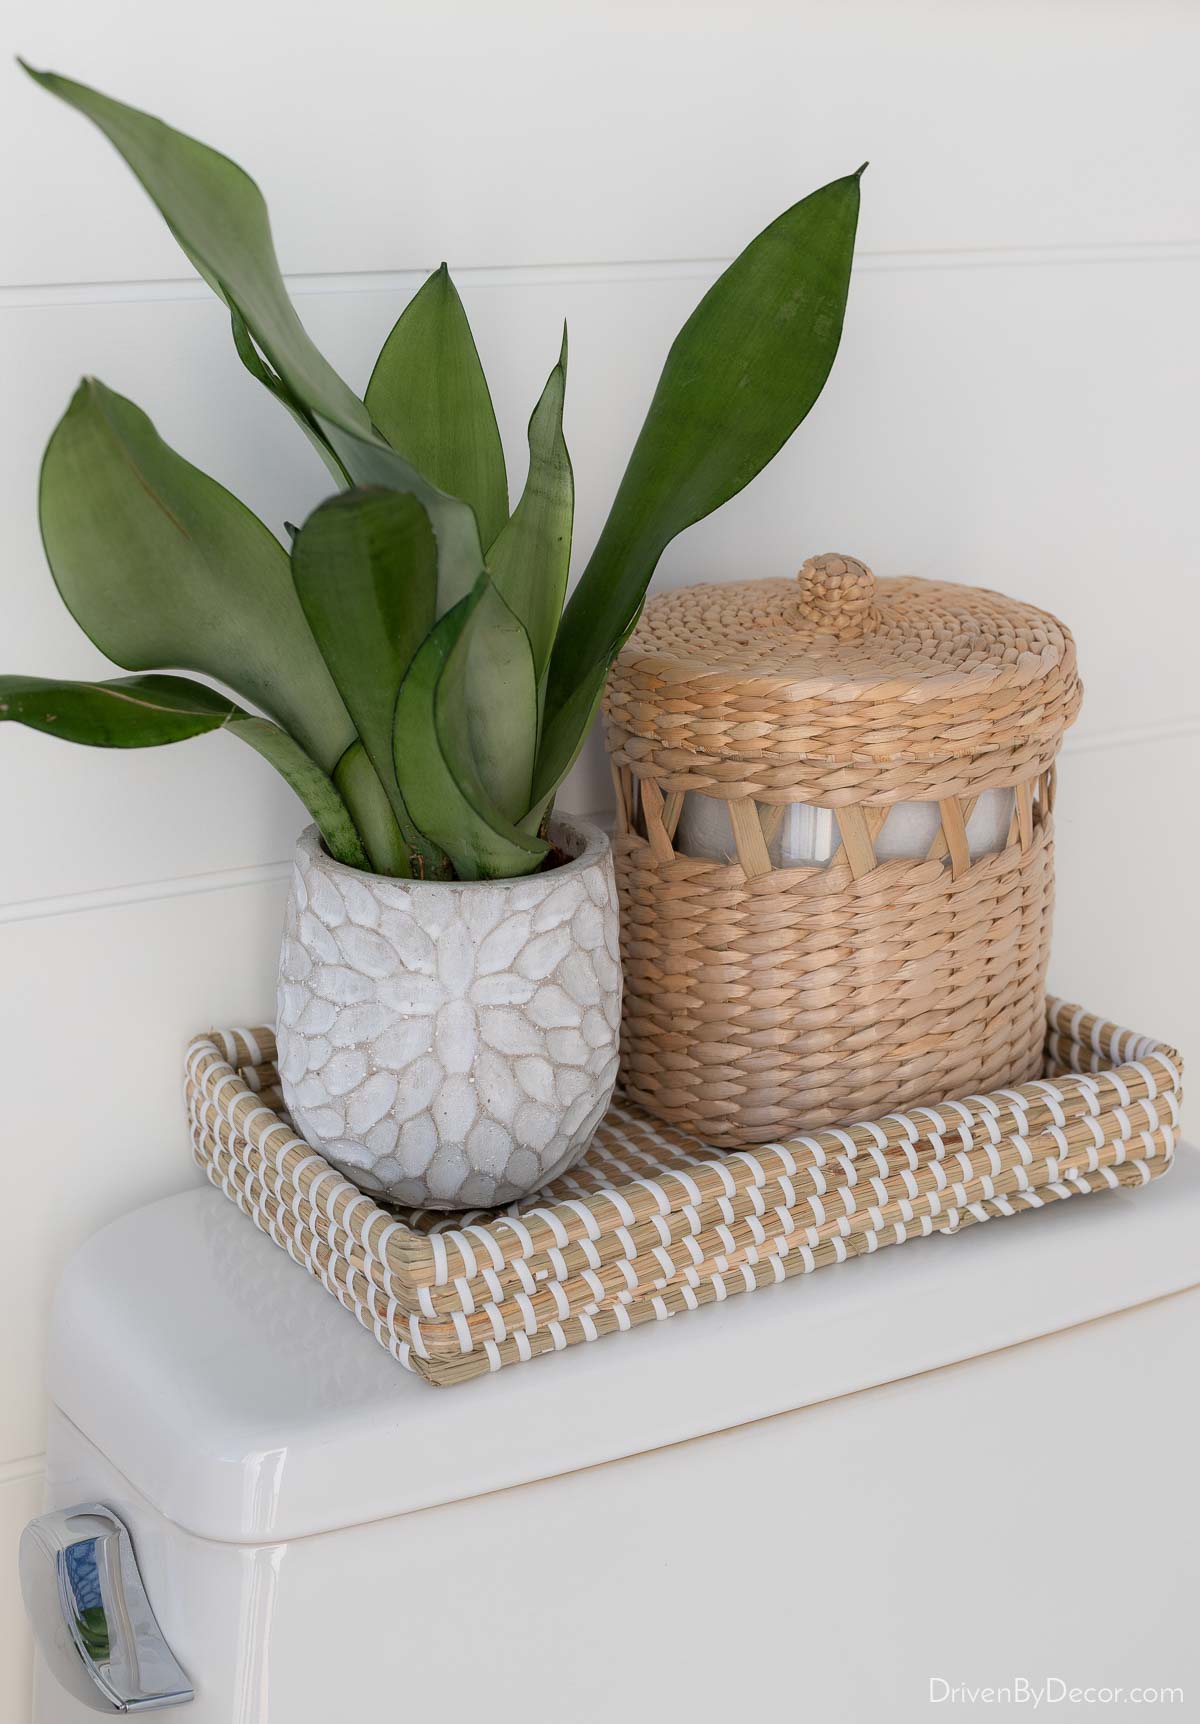 Woven toilet tray with plant and holder for an extra roll of TP